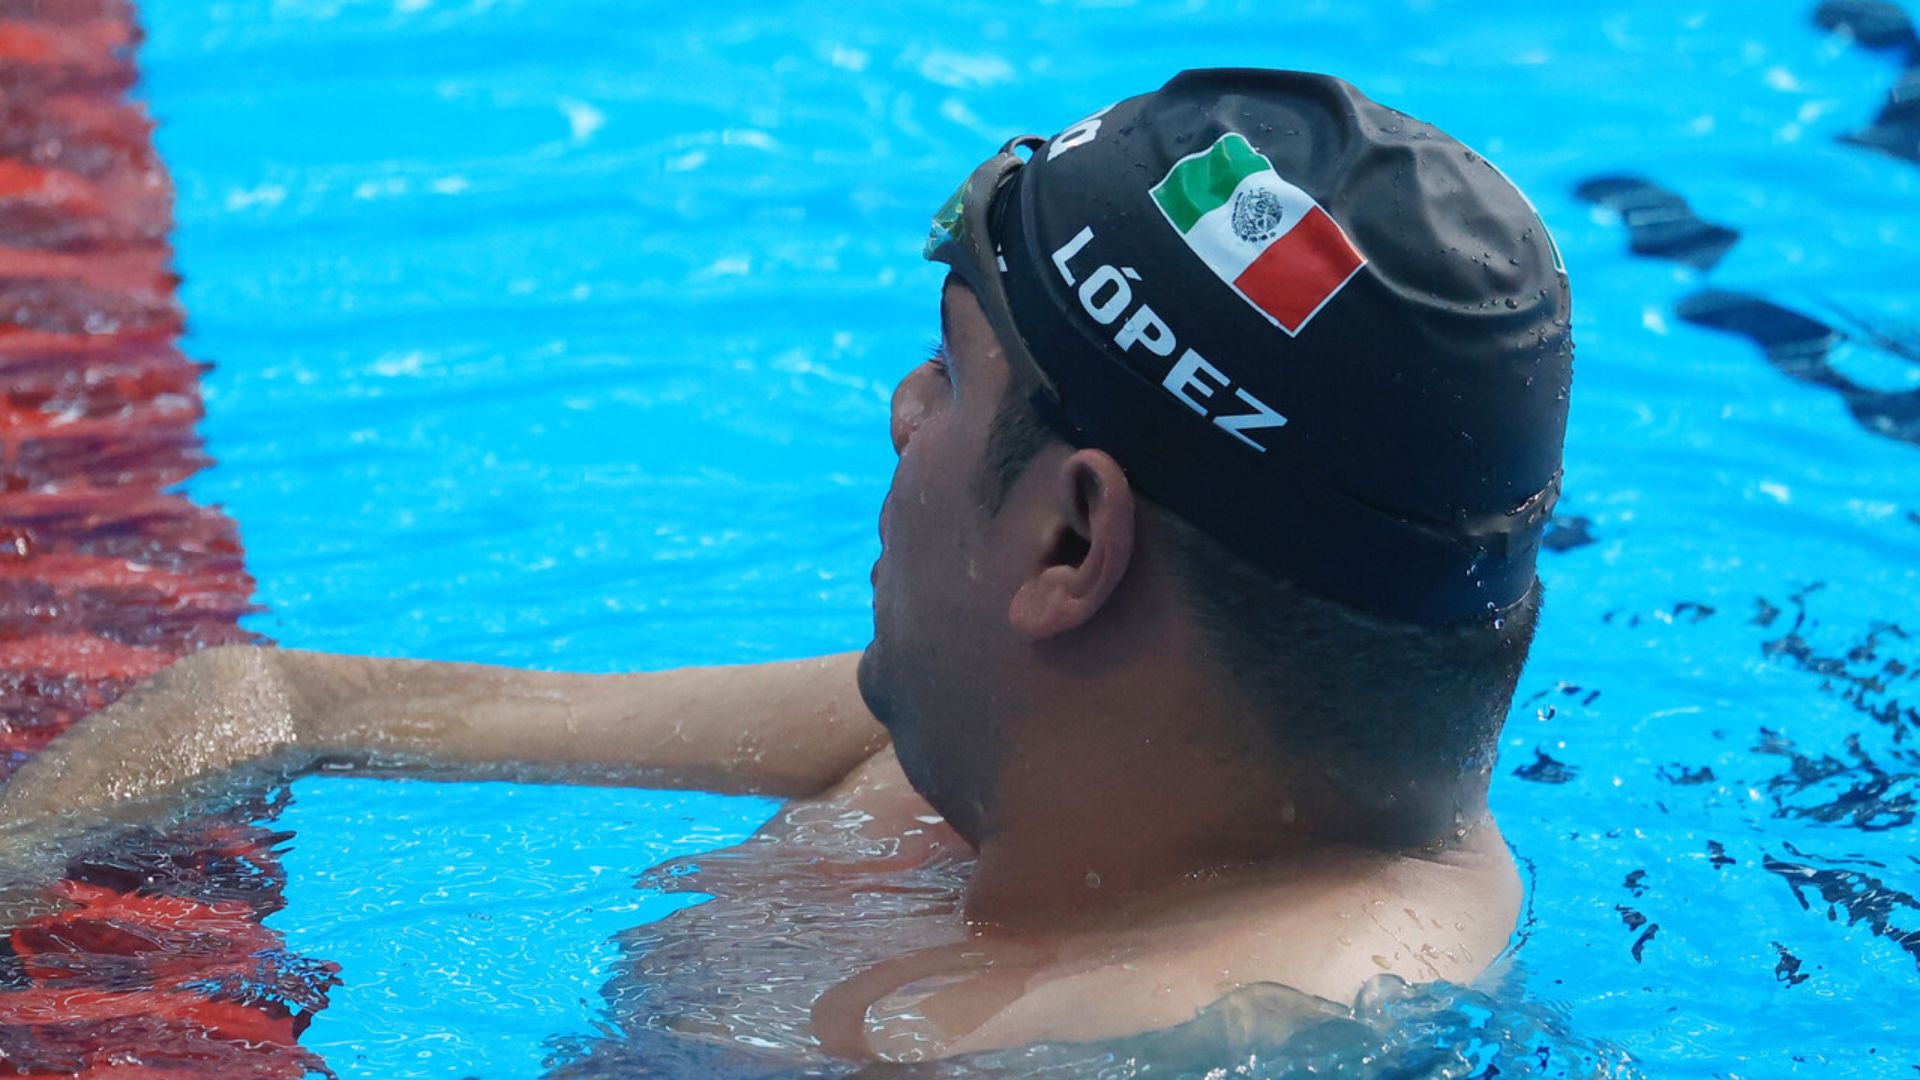 Mexico Takes 1st and 2nd Places in 200m Freestyle S3, Bronze for Chile